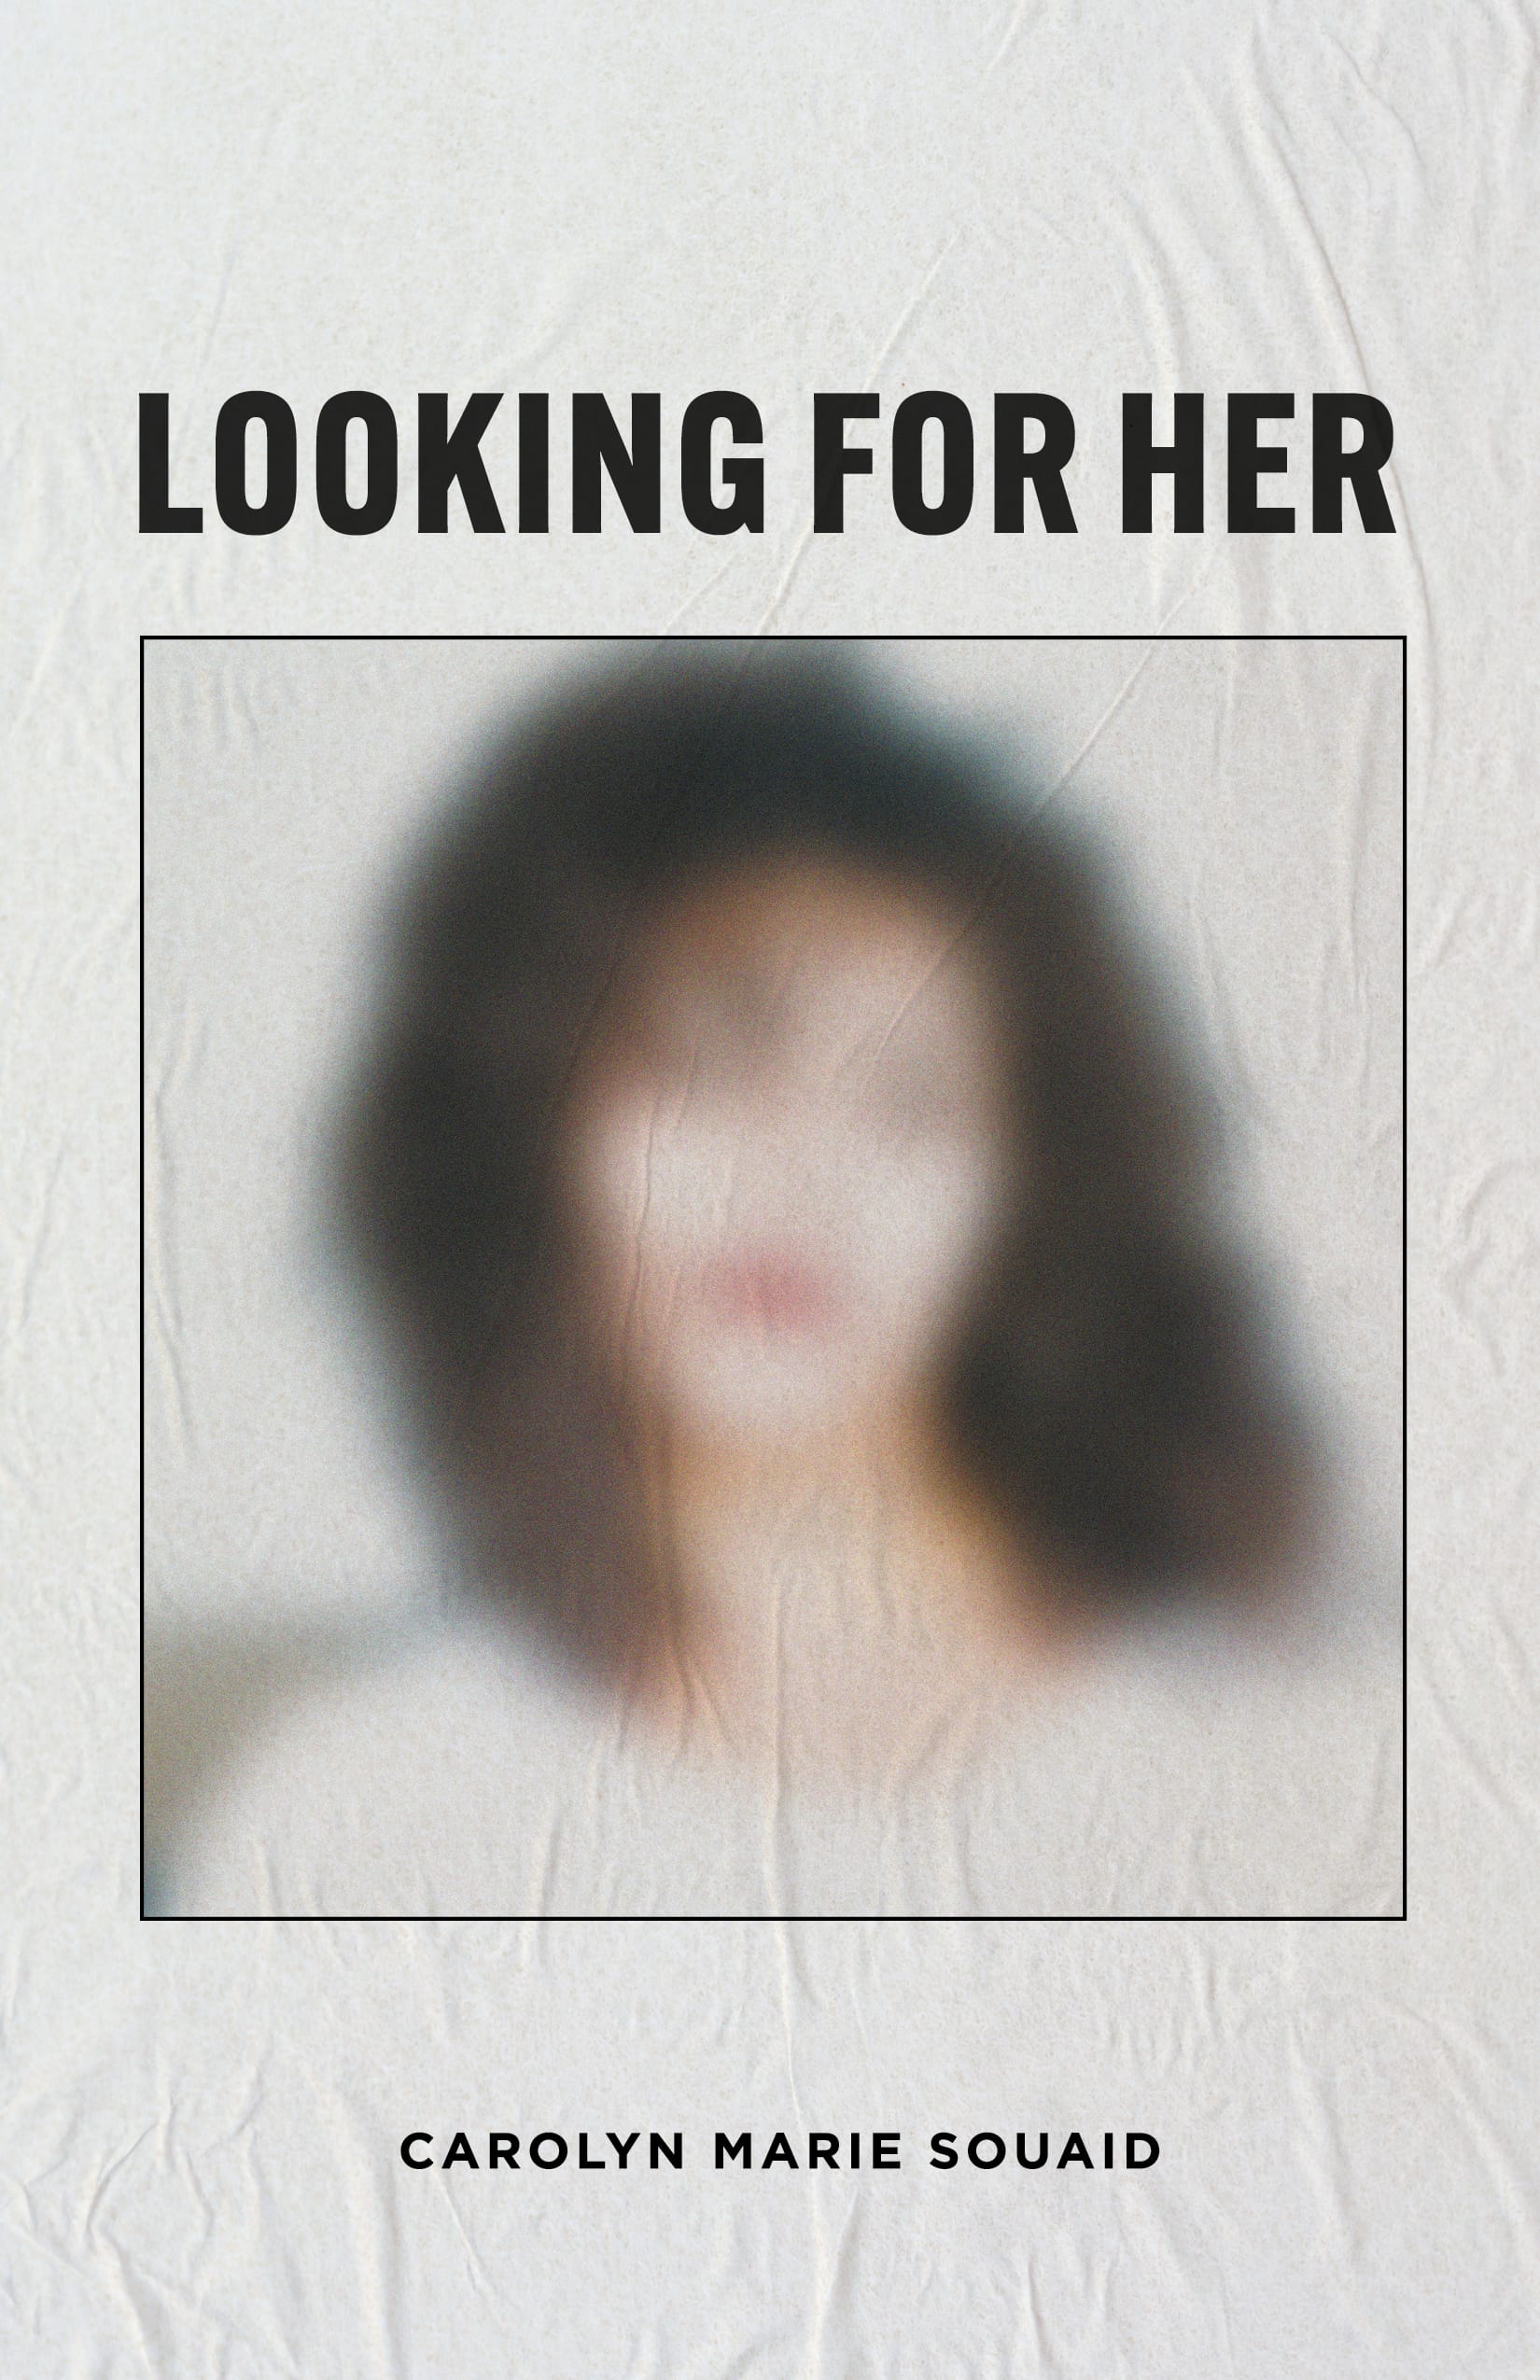 LOOKING FOR HER